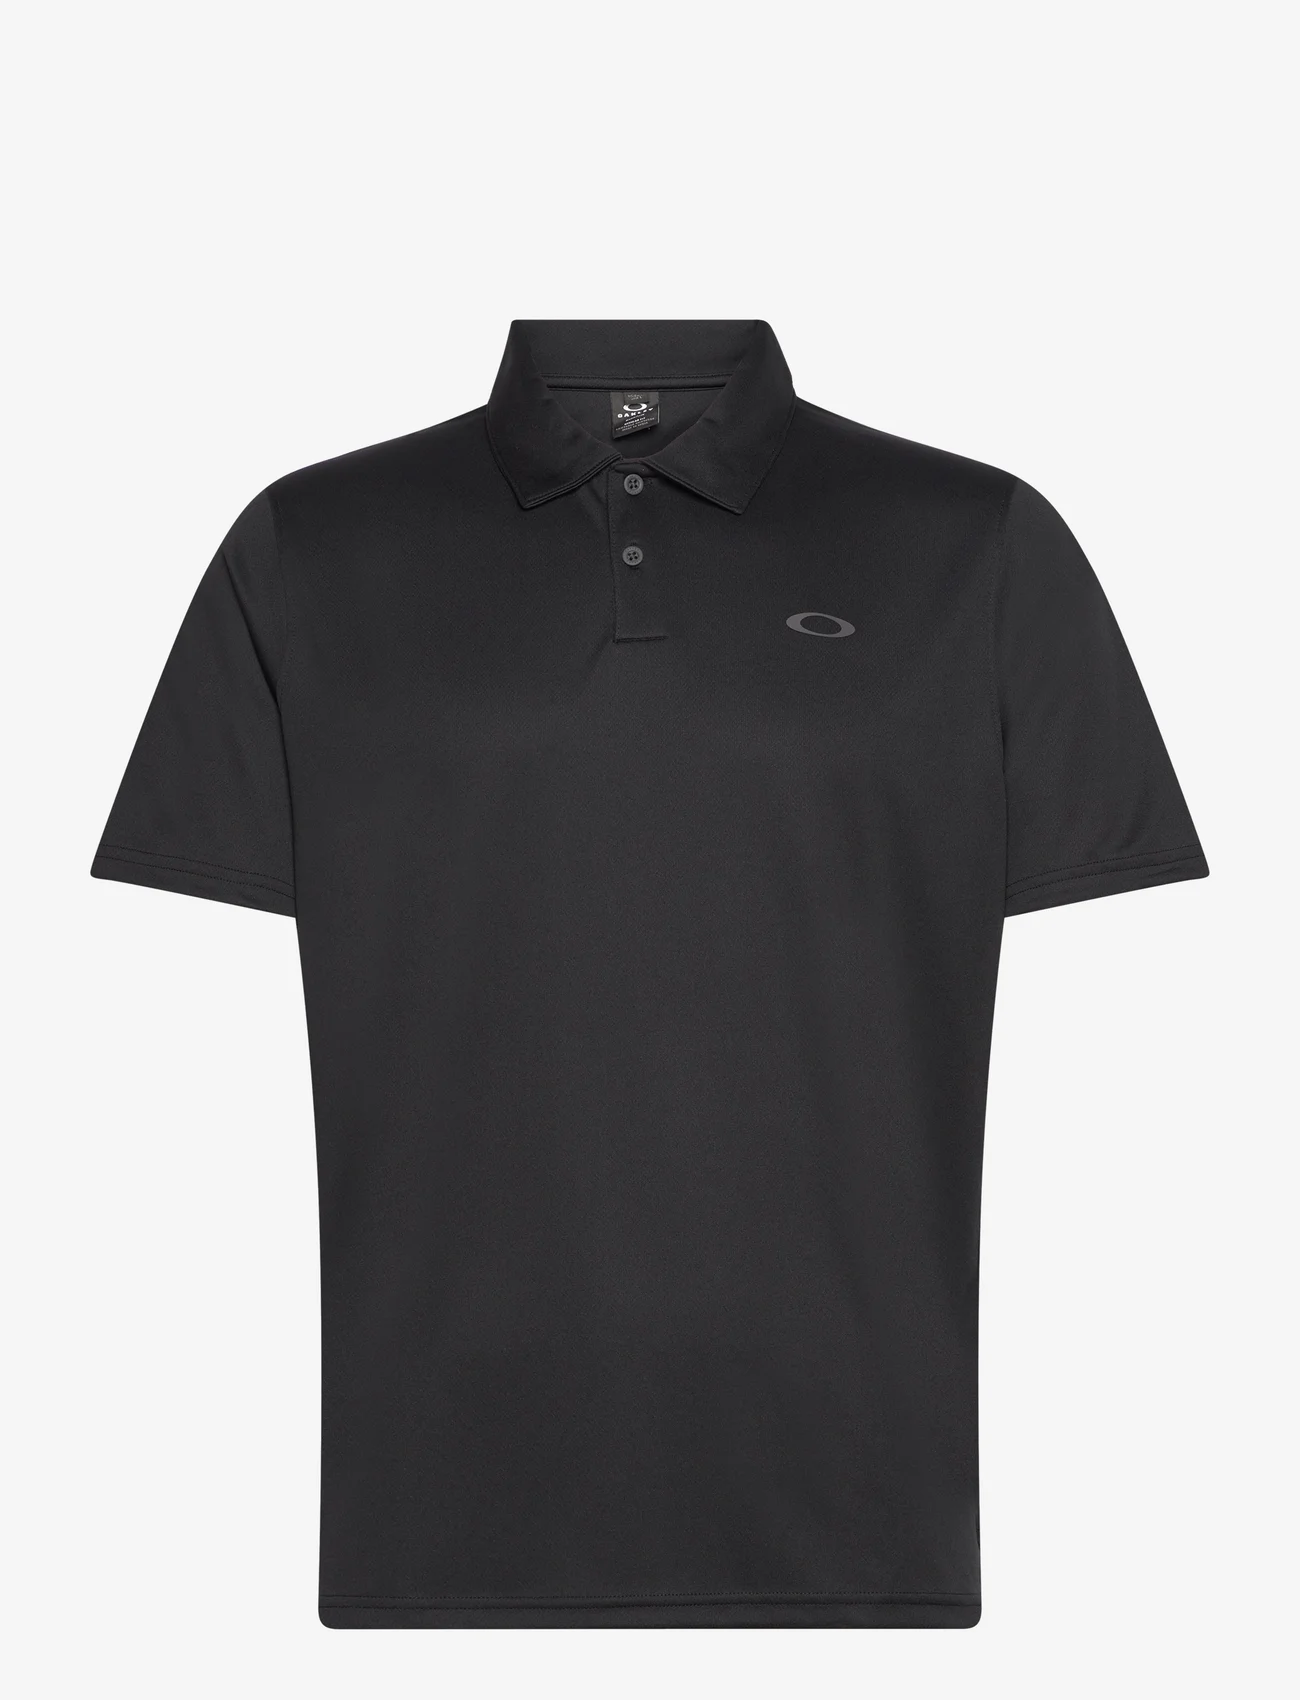 Oakley Sports - OAKLEY ICON TN PROTECT RC - short-sleeved polos - blackout - 0